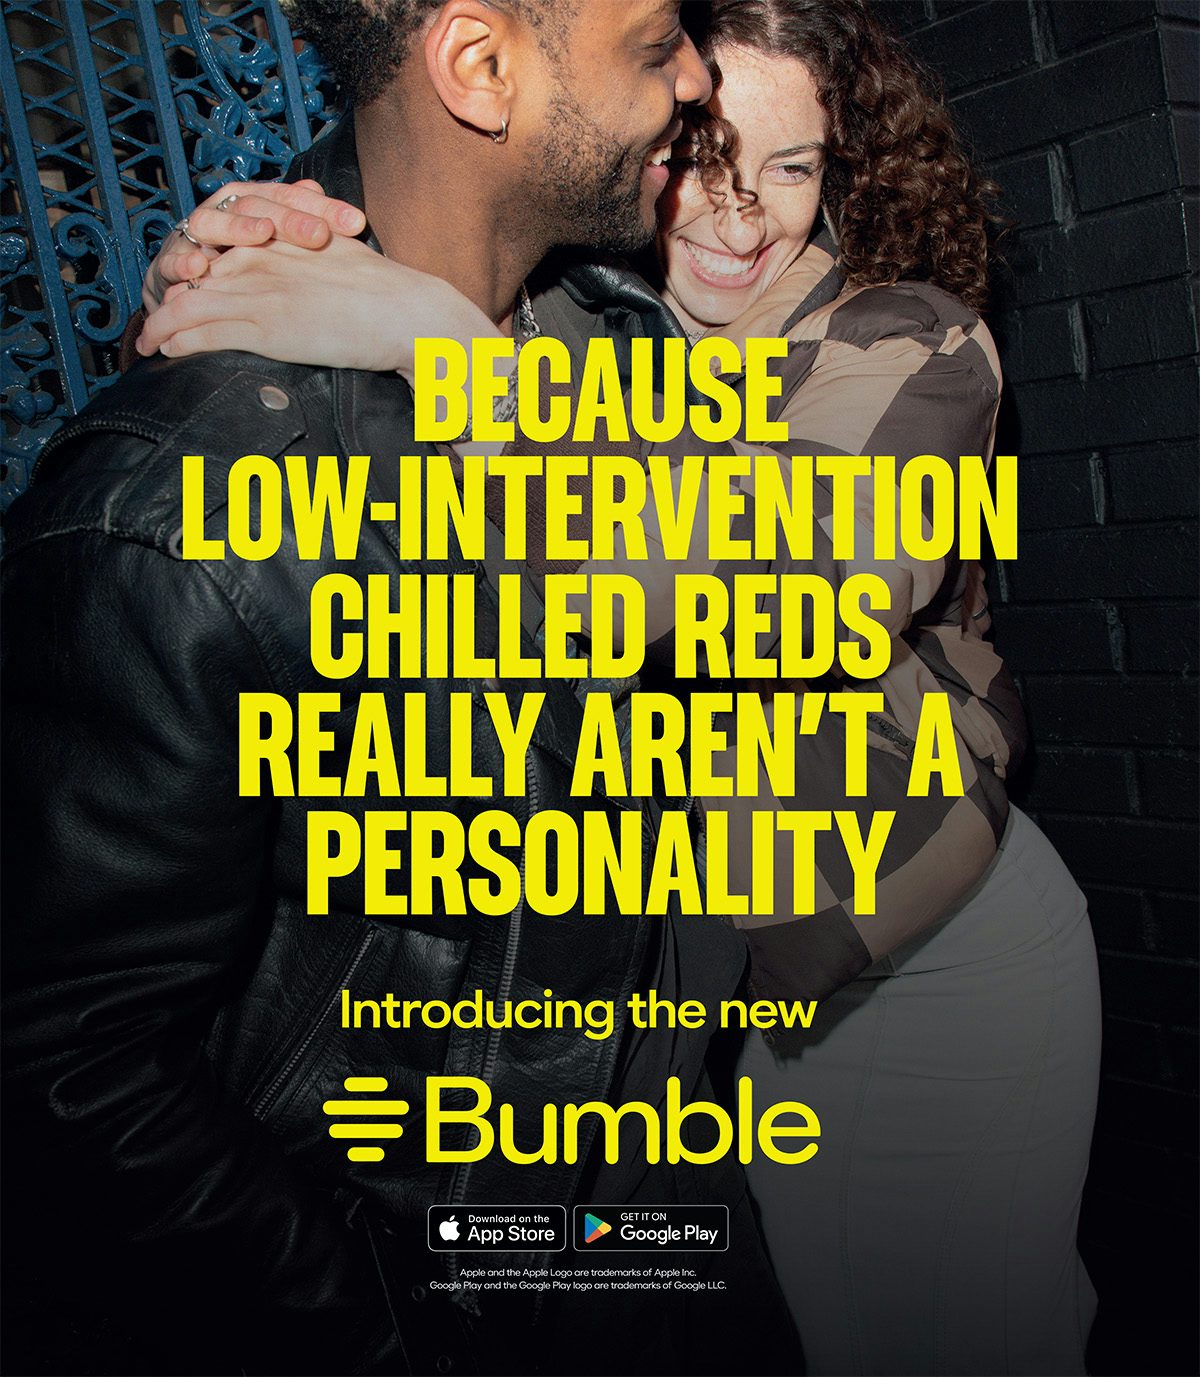 Photo of two people embracing, overlaid with the text 'Because low-intervention chilled reds really aren't a personality'